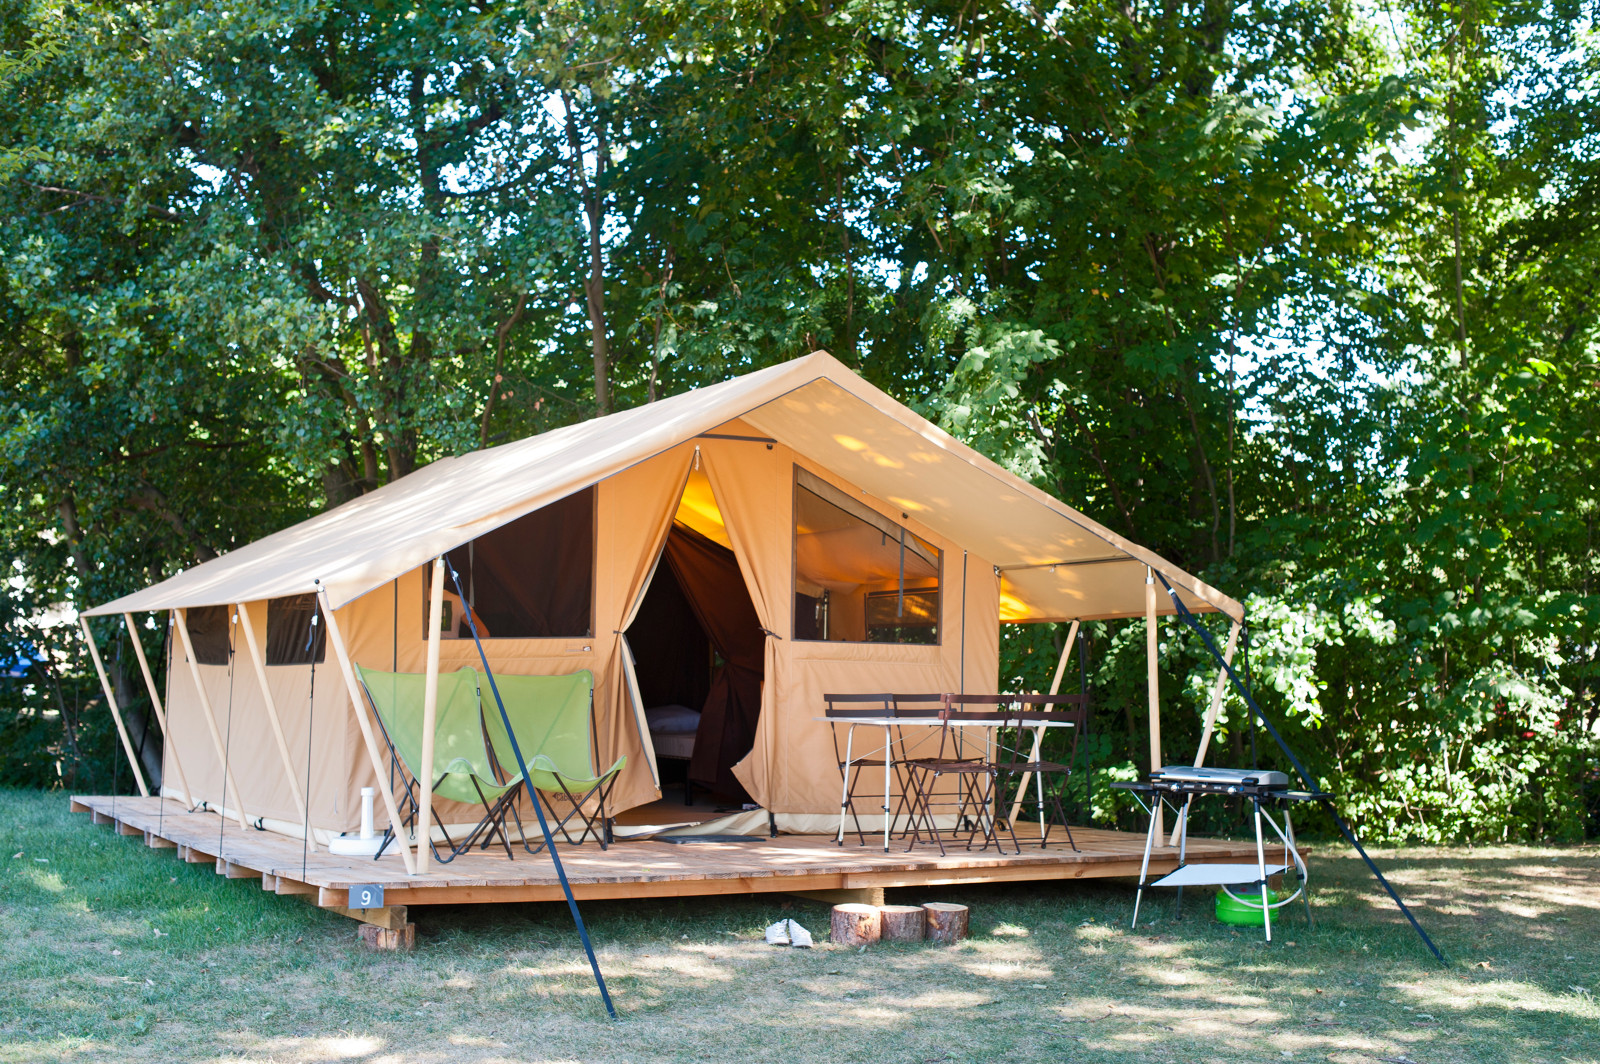 Camping de Strasbourg : Information and booking